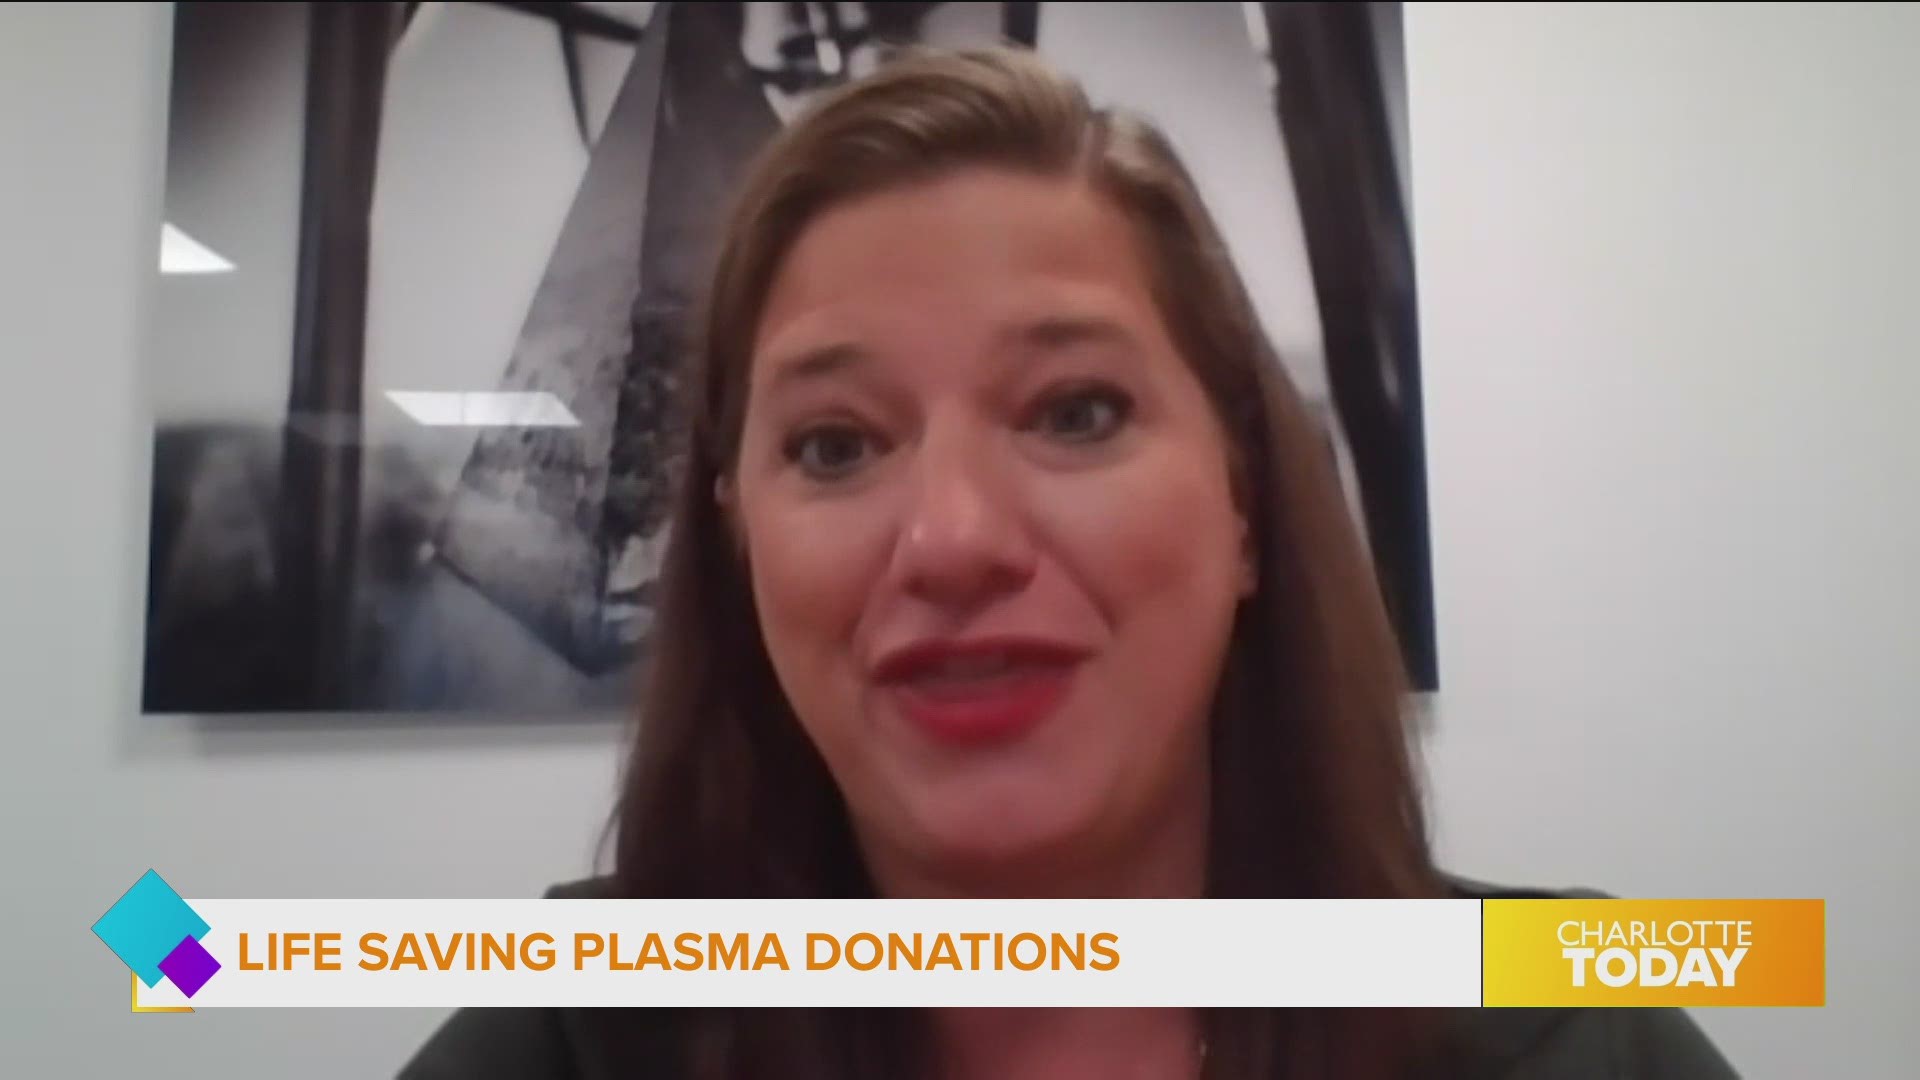 Here's why plasma donations are needed in the Charlotte community.